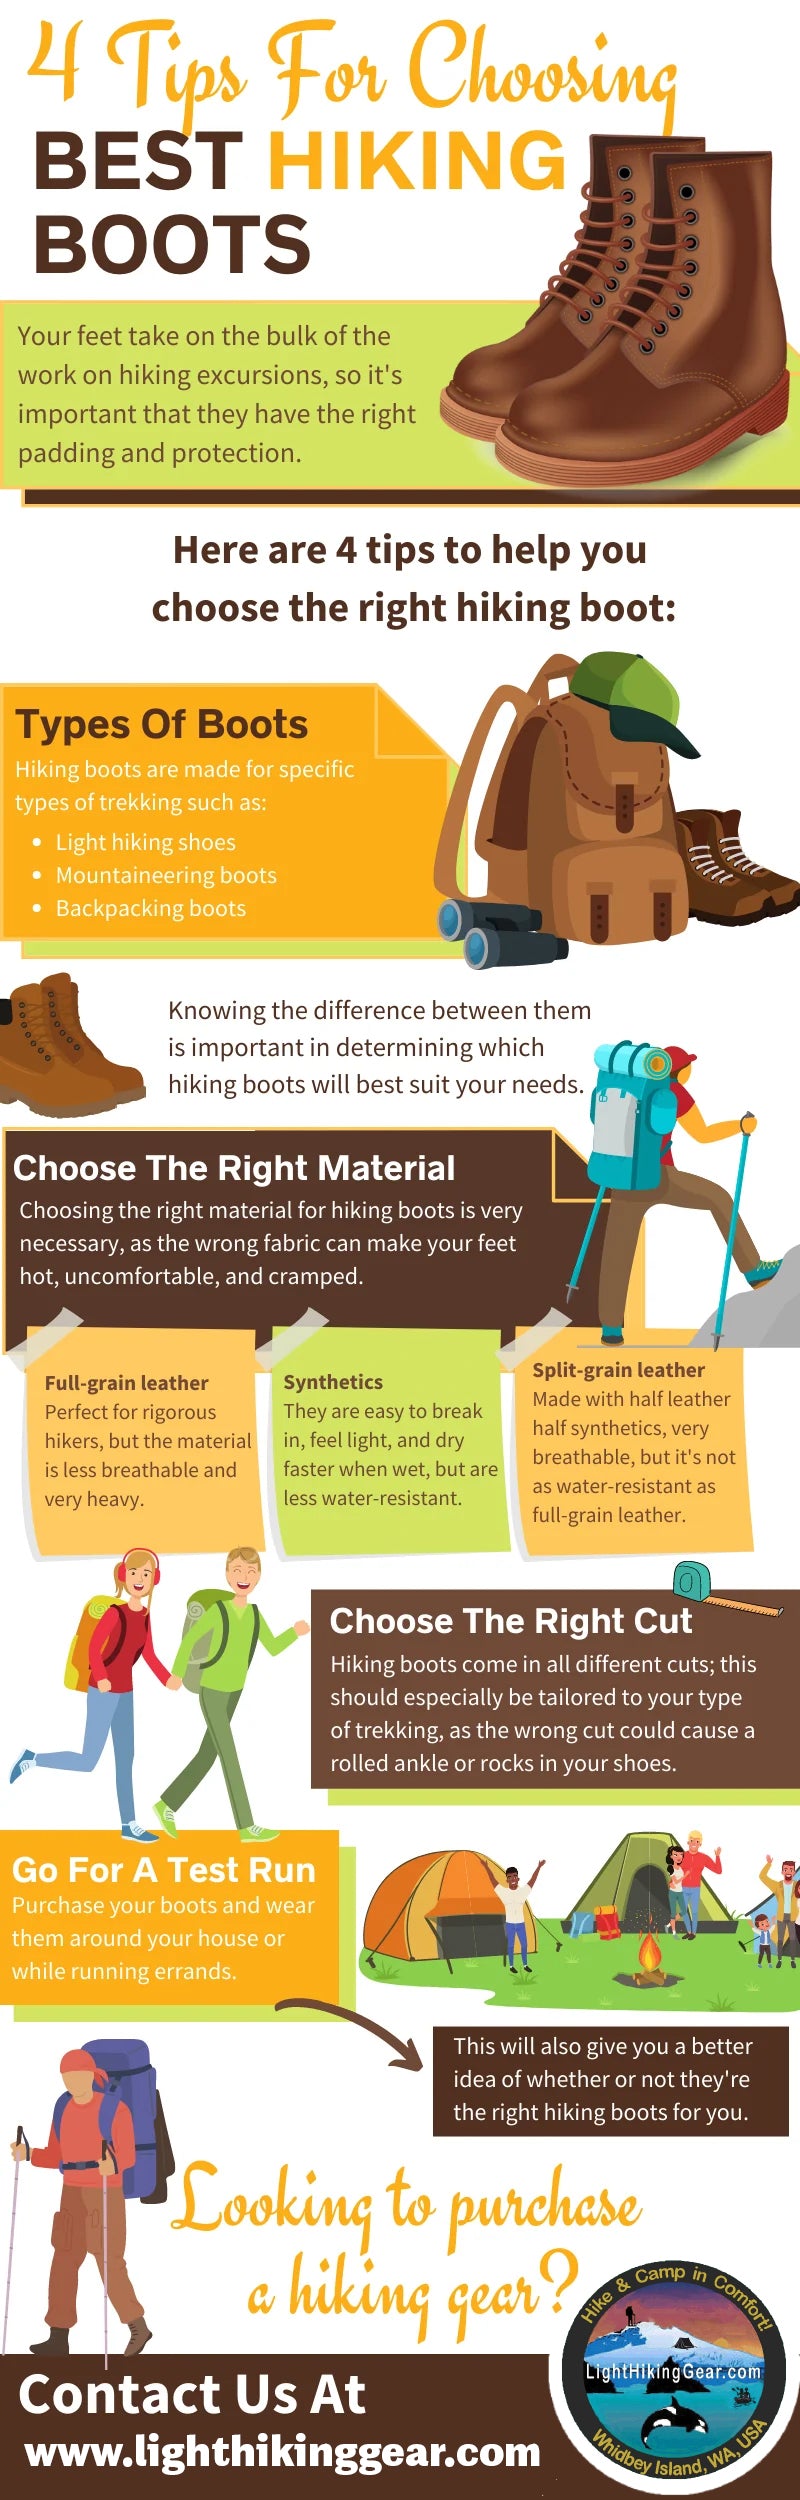 4 Tips For Choosing Best Hiking Boots | Infographic